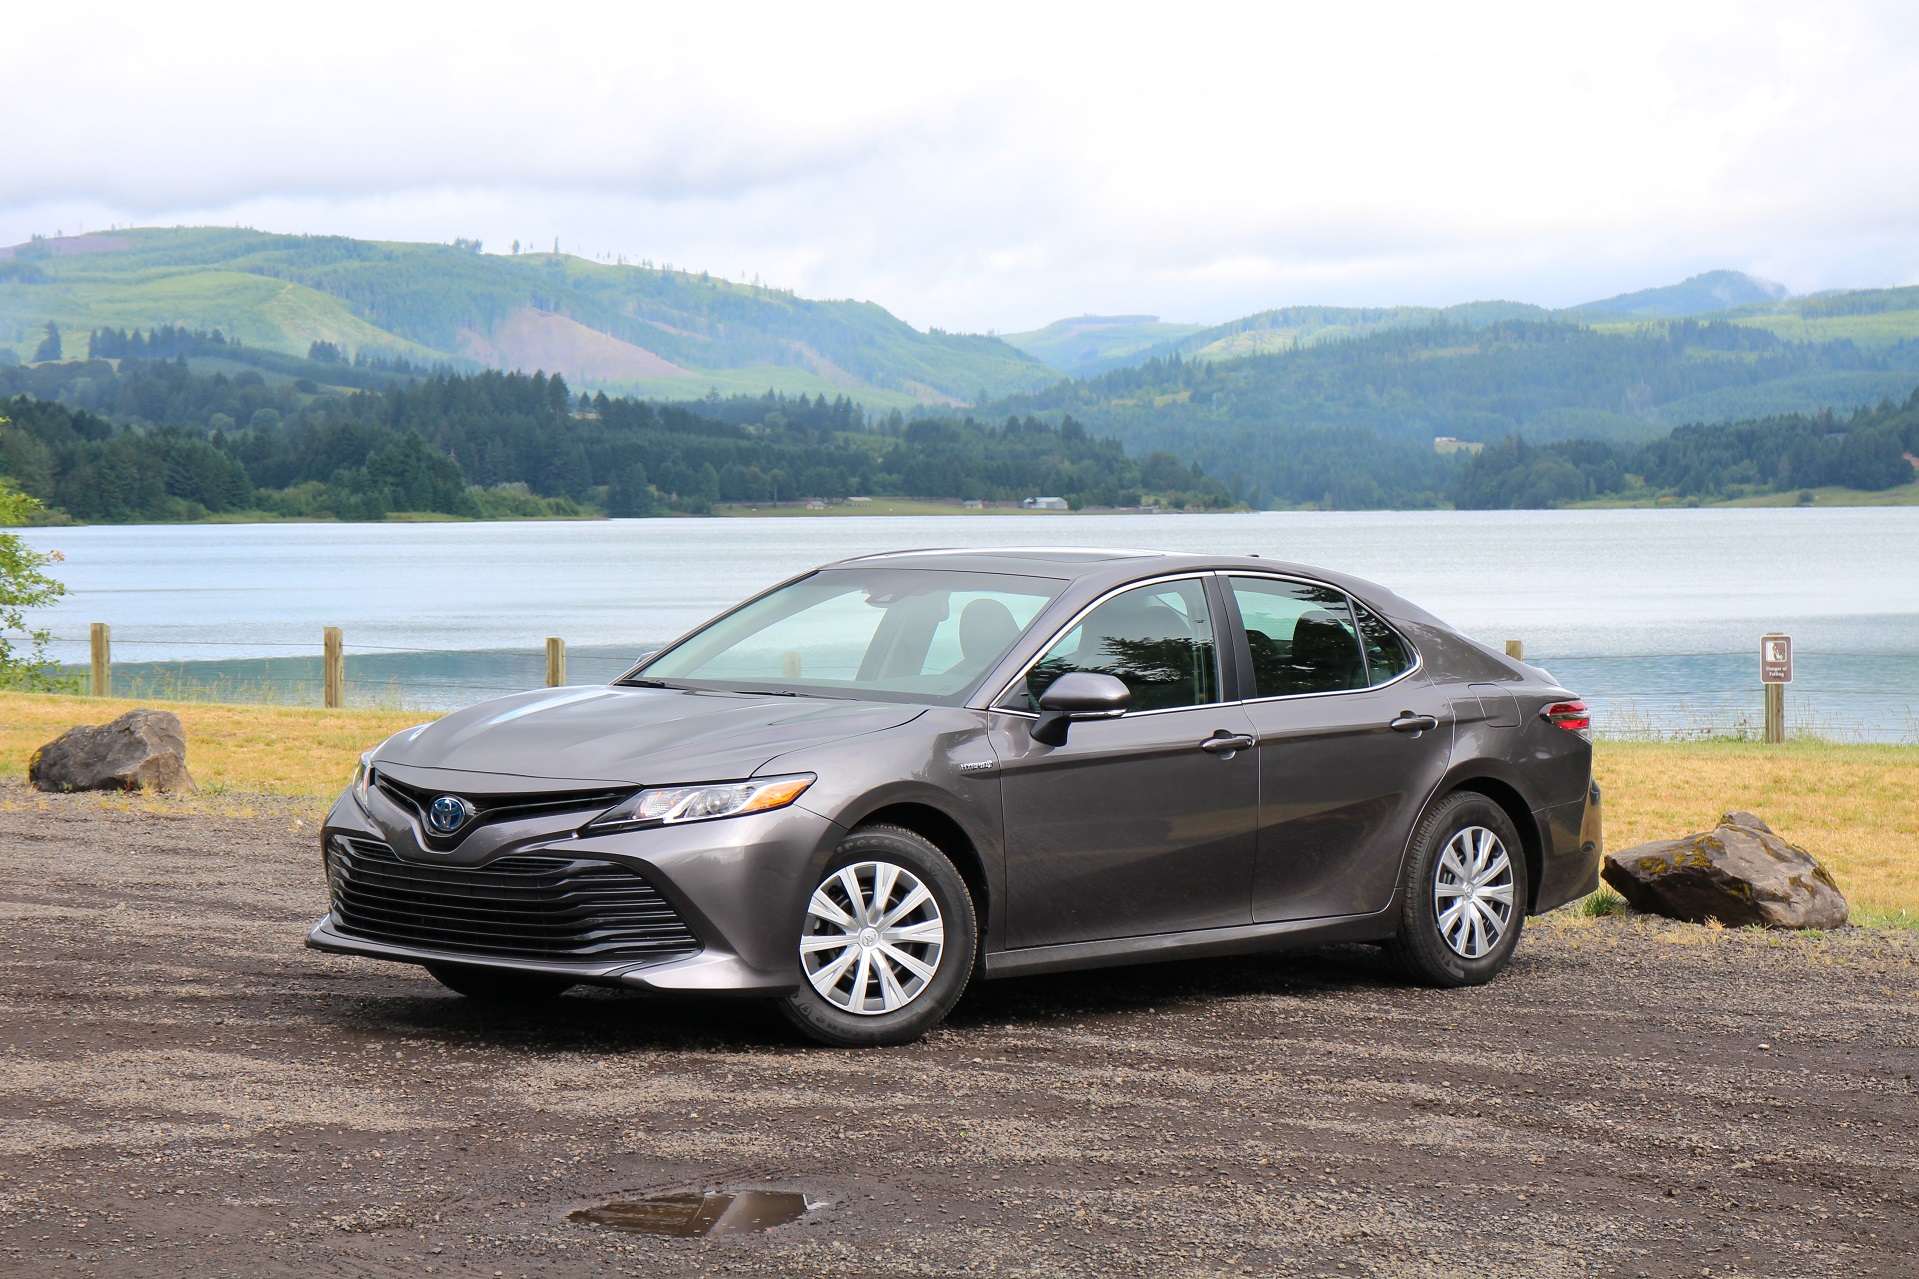 Best deals on hybrid, electric, fuel-efficient cars for ...